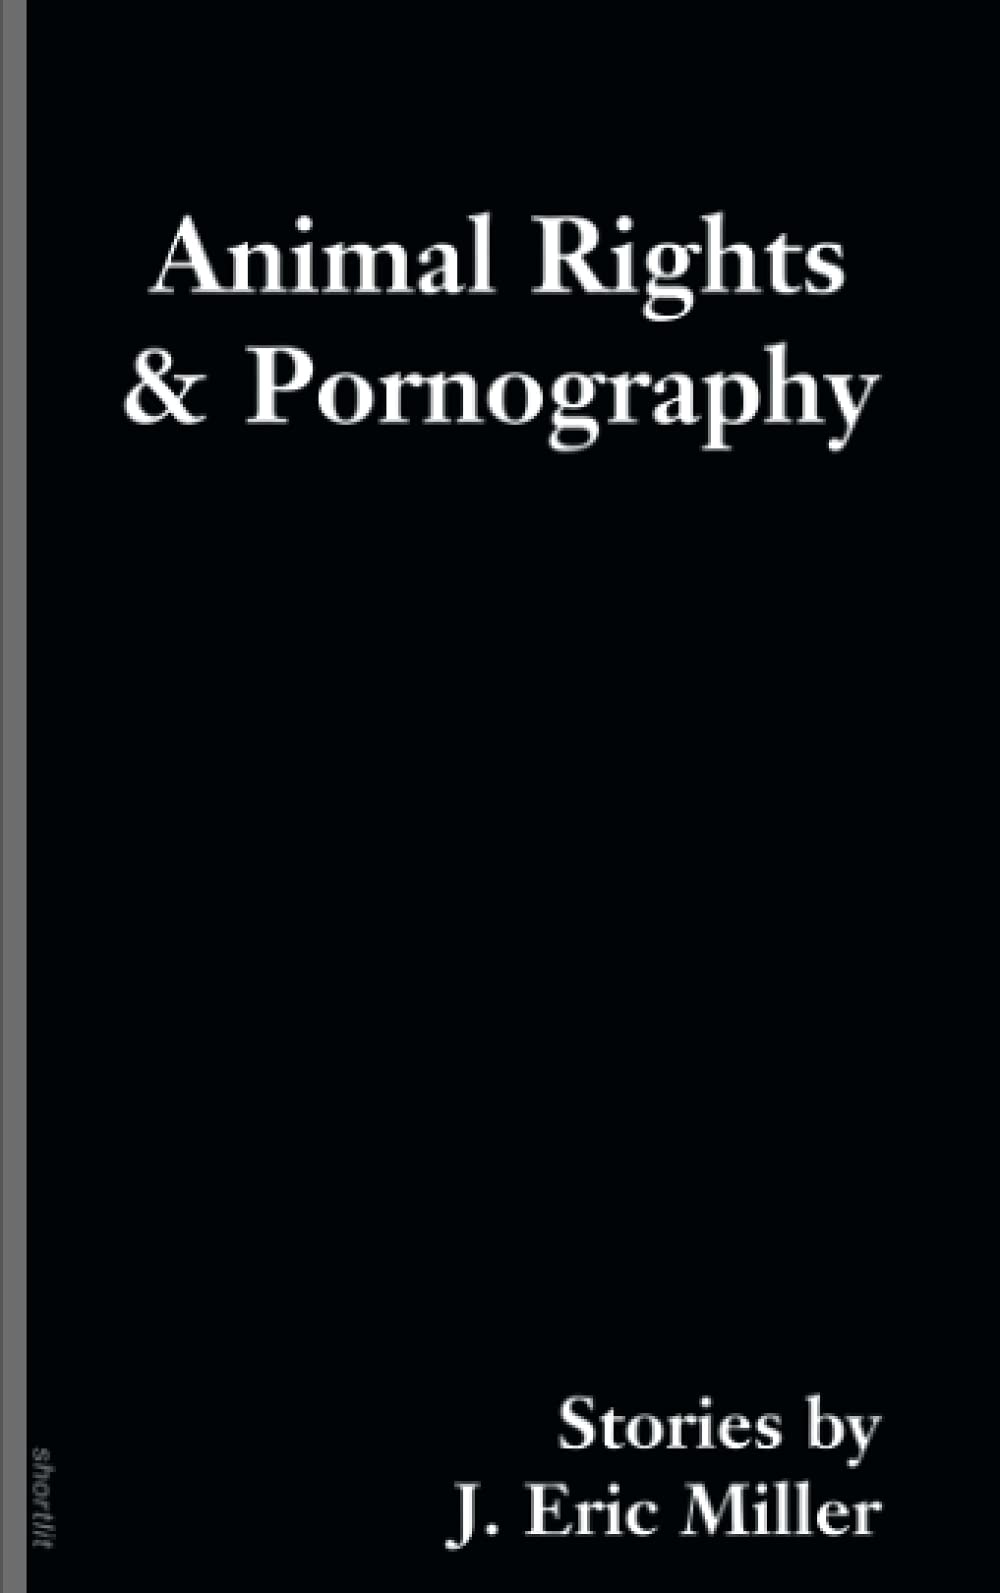 Animal Rights & Pornography, by J. Eric Miller